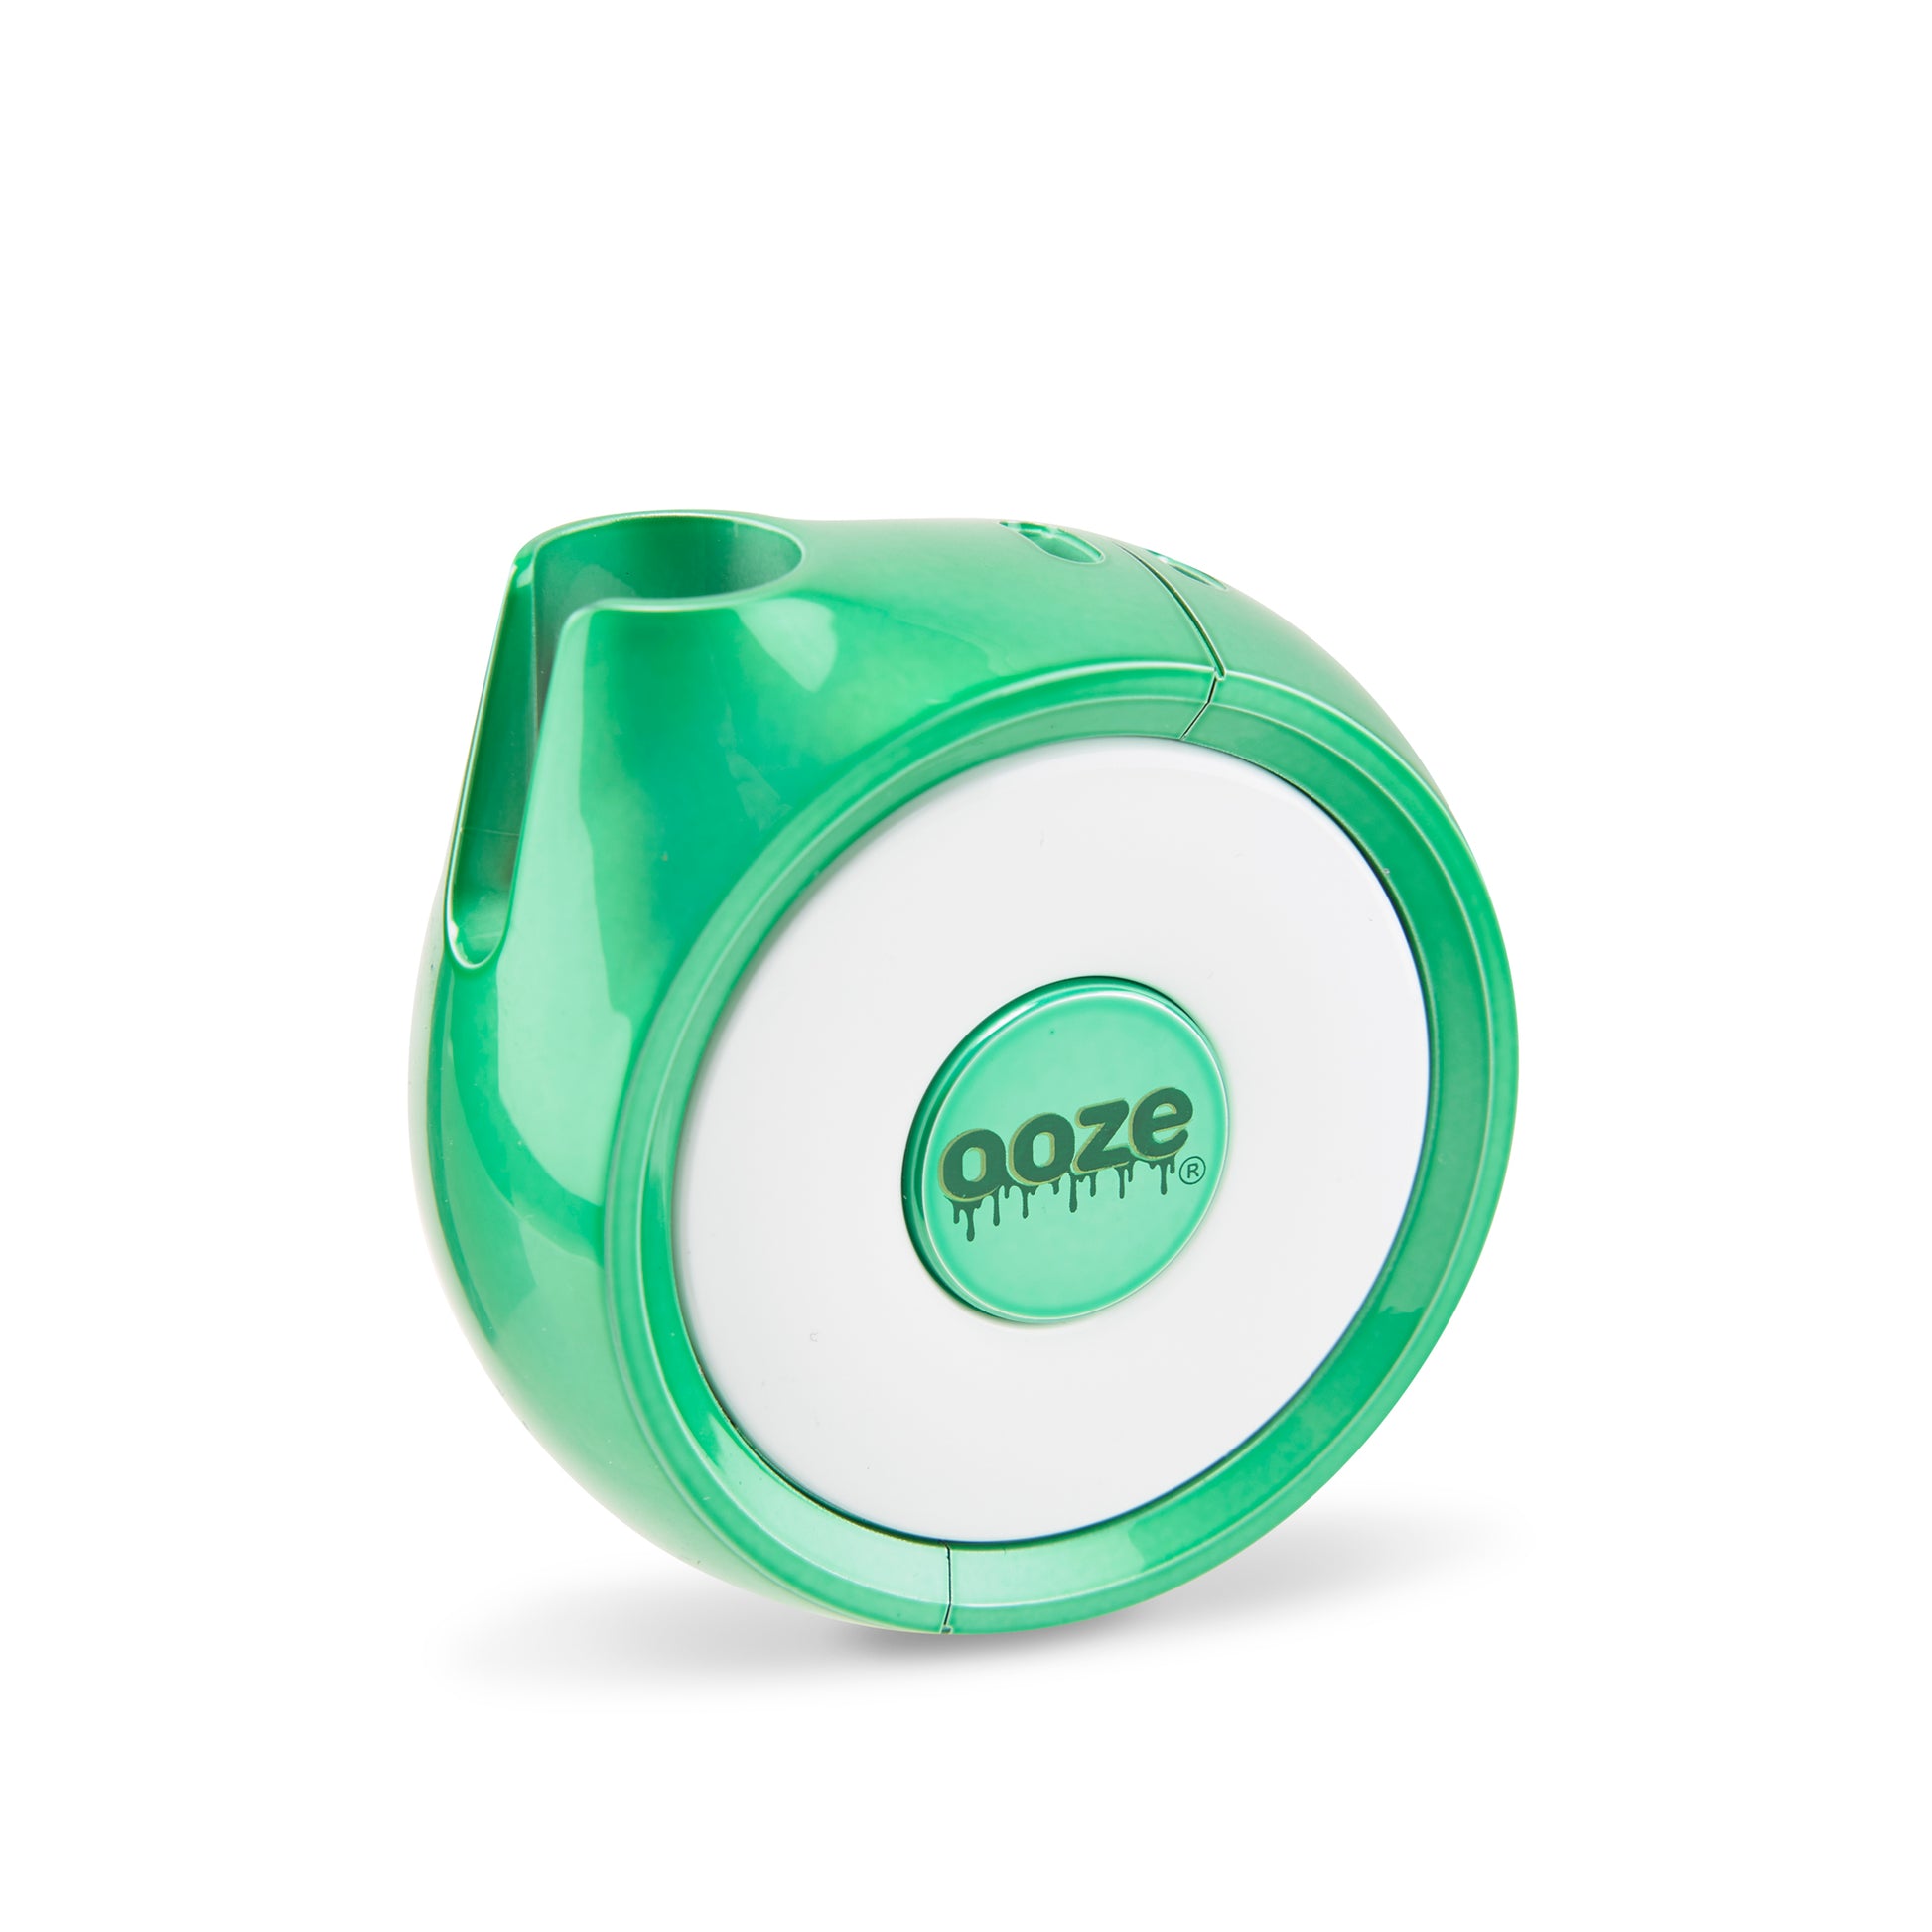 The Ooze Movez Speaker Vape in Mary Jade is shown on an angle wtih the cartridge chamber showing.